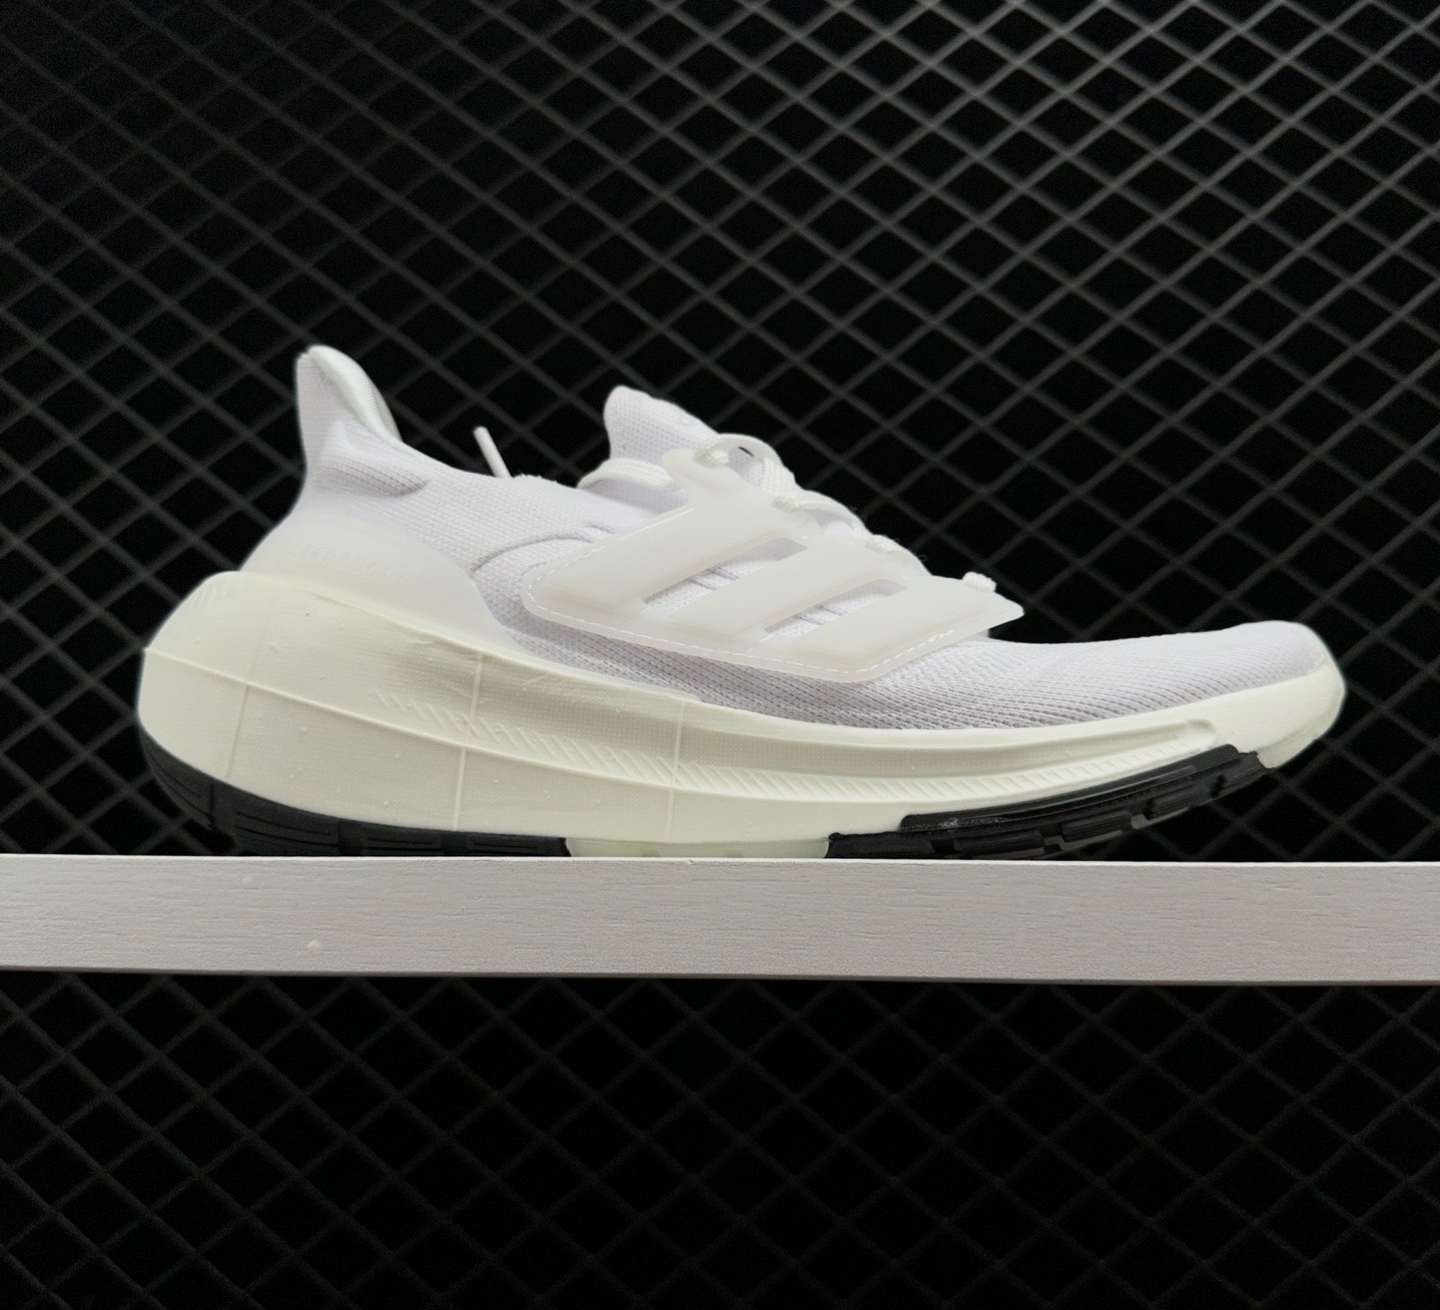 Adidas Ultra Boost Light Triple White GY9350 - Lightweight and Stylish Sports Shoes